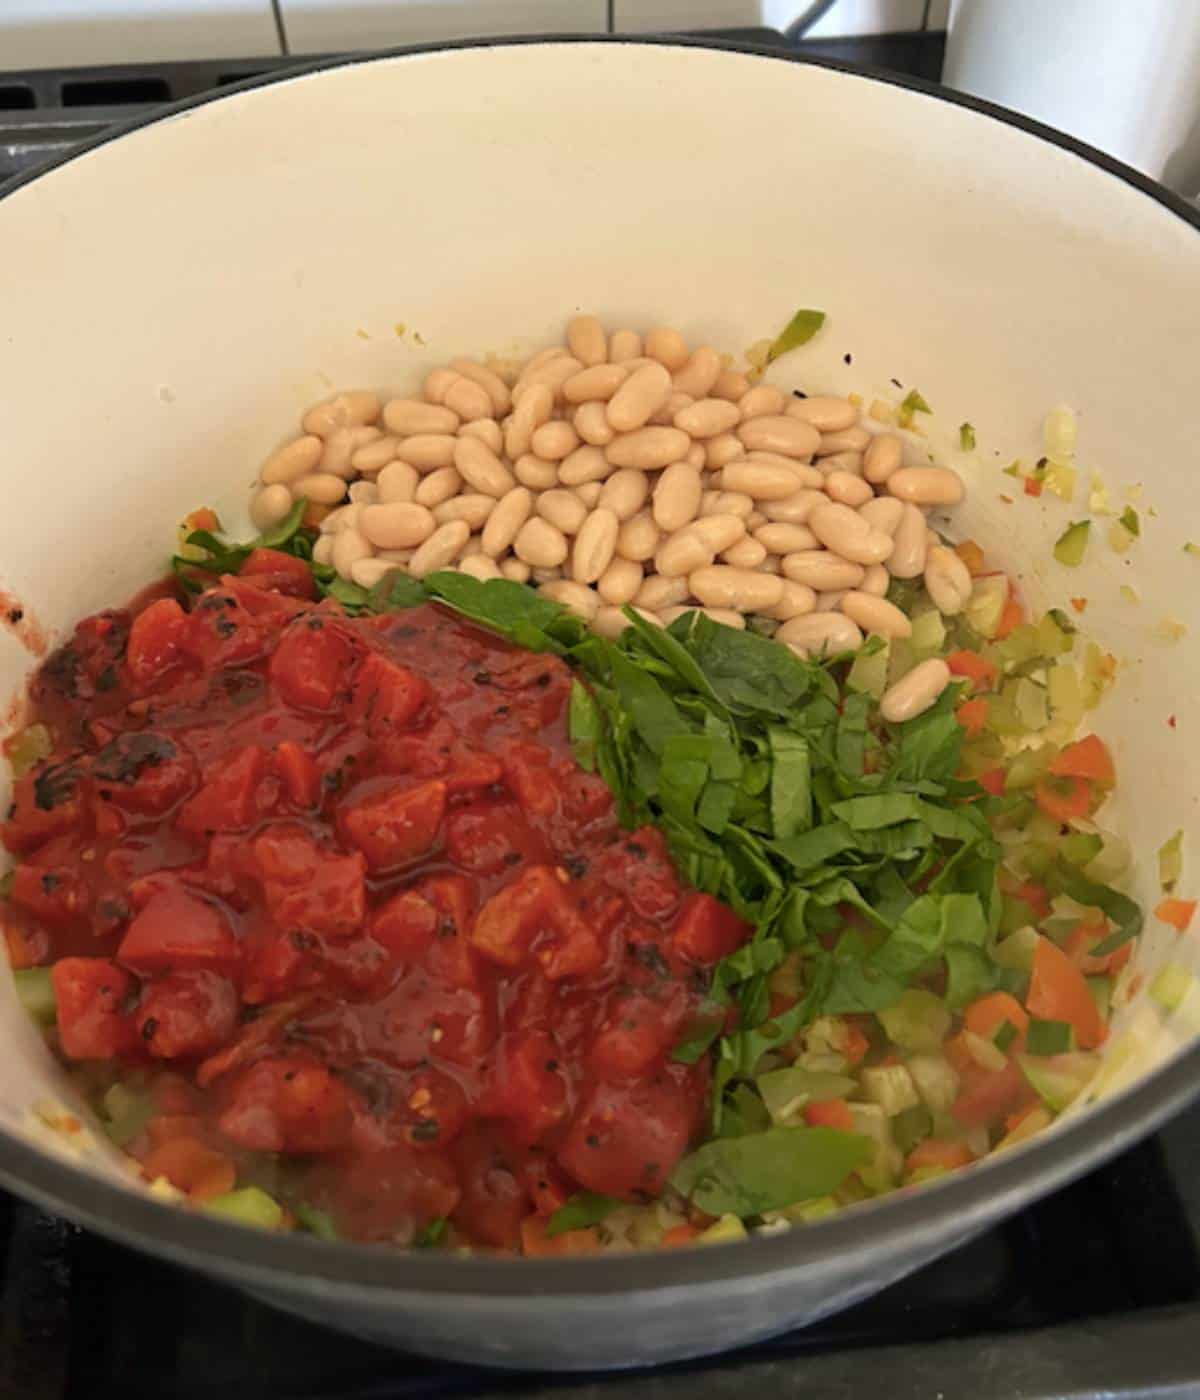 Tomatoes and beans with vegetables in pot.